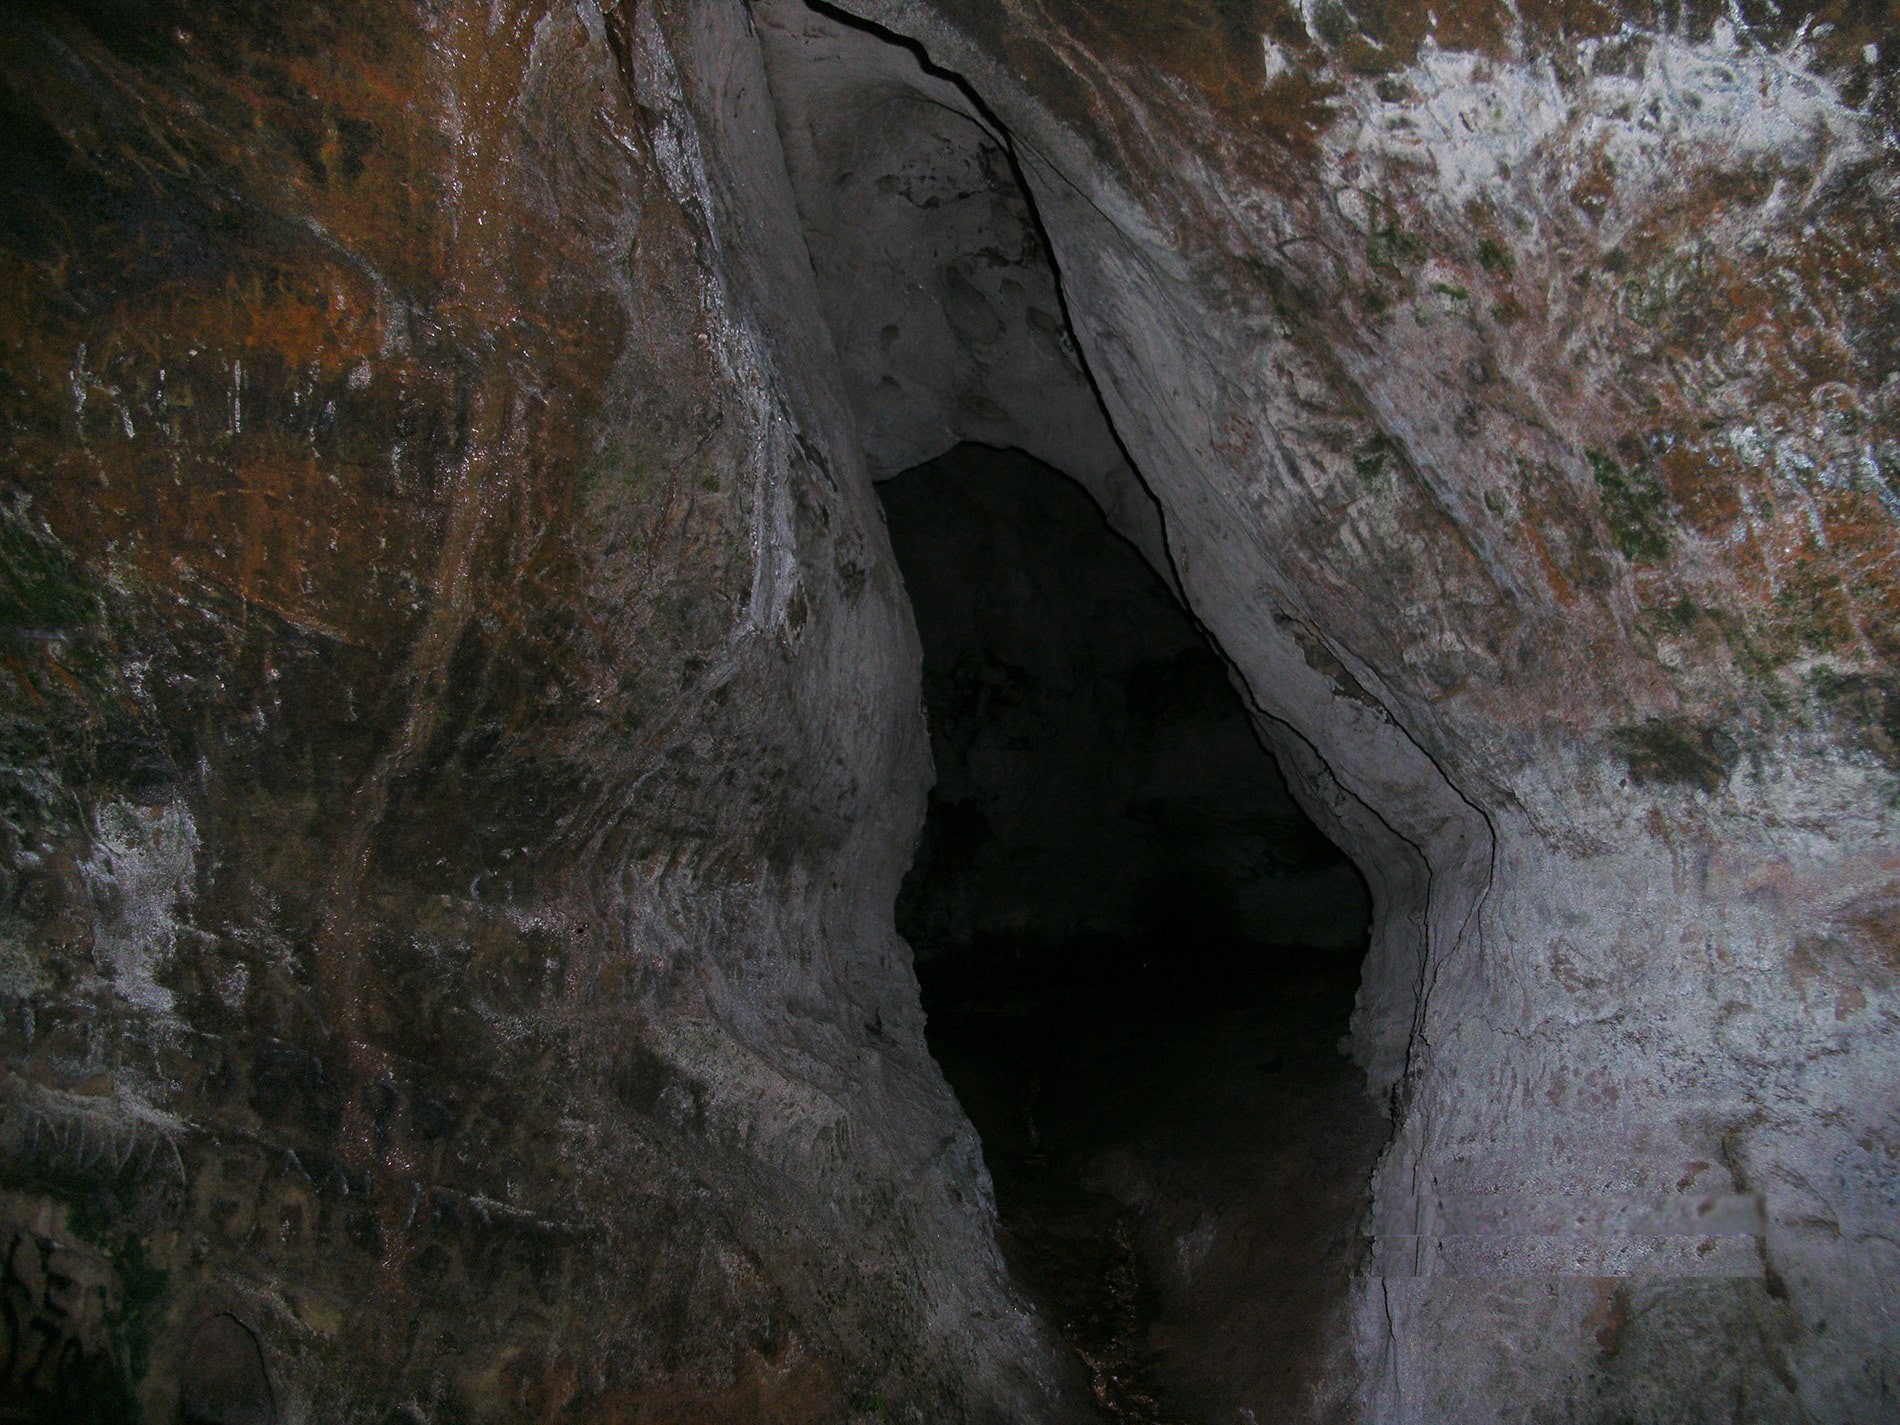 the tourist centre of ogbunike cave is located near